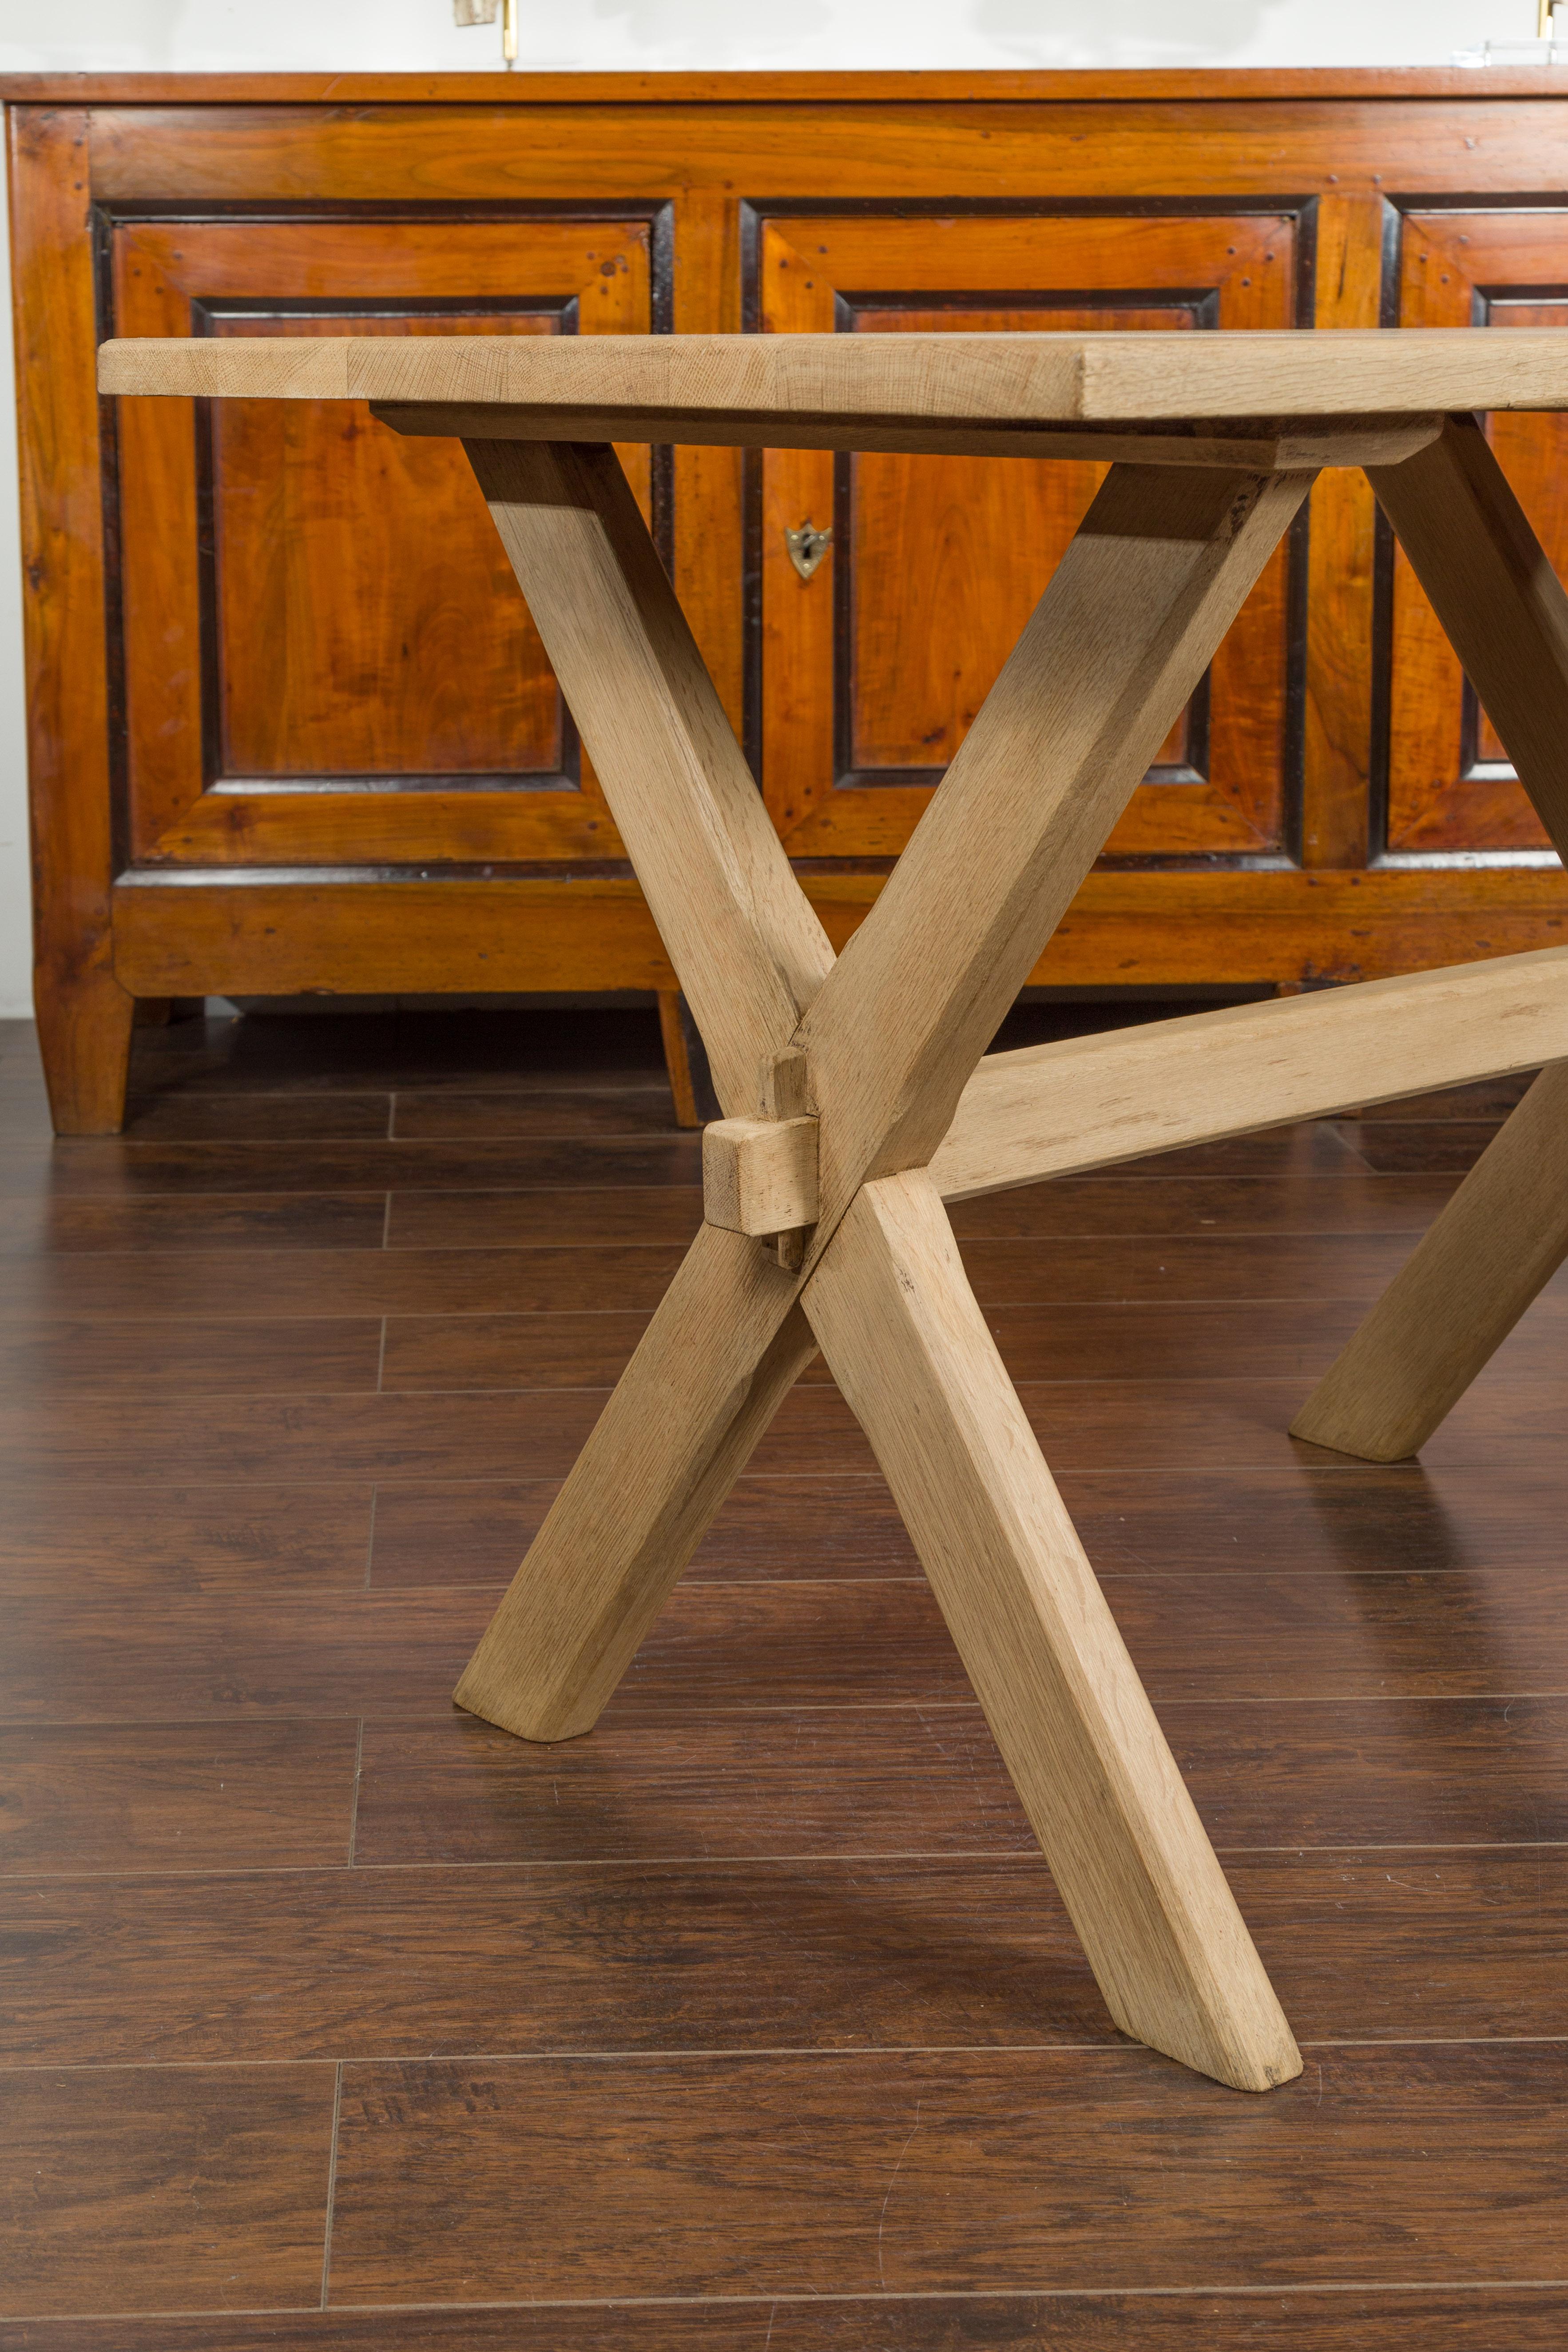 English Turn of the Century Oak Sawbuck Table with X-Form Base, circa 1900 For Sale 3